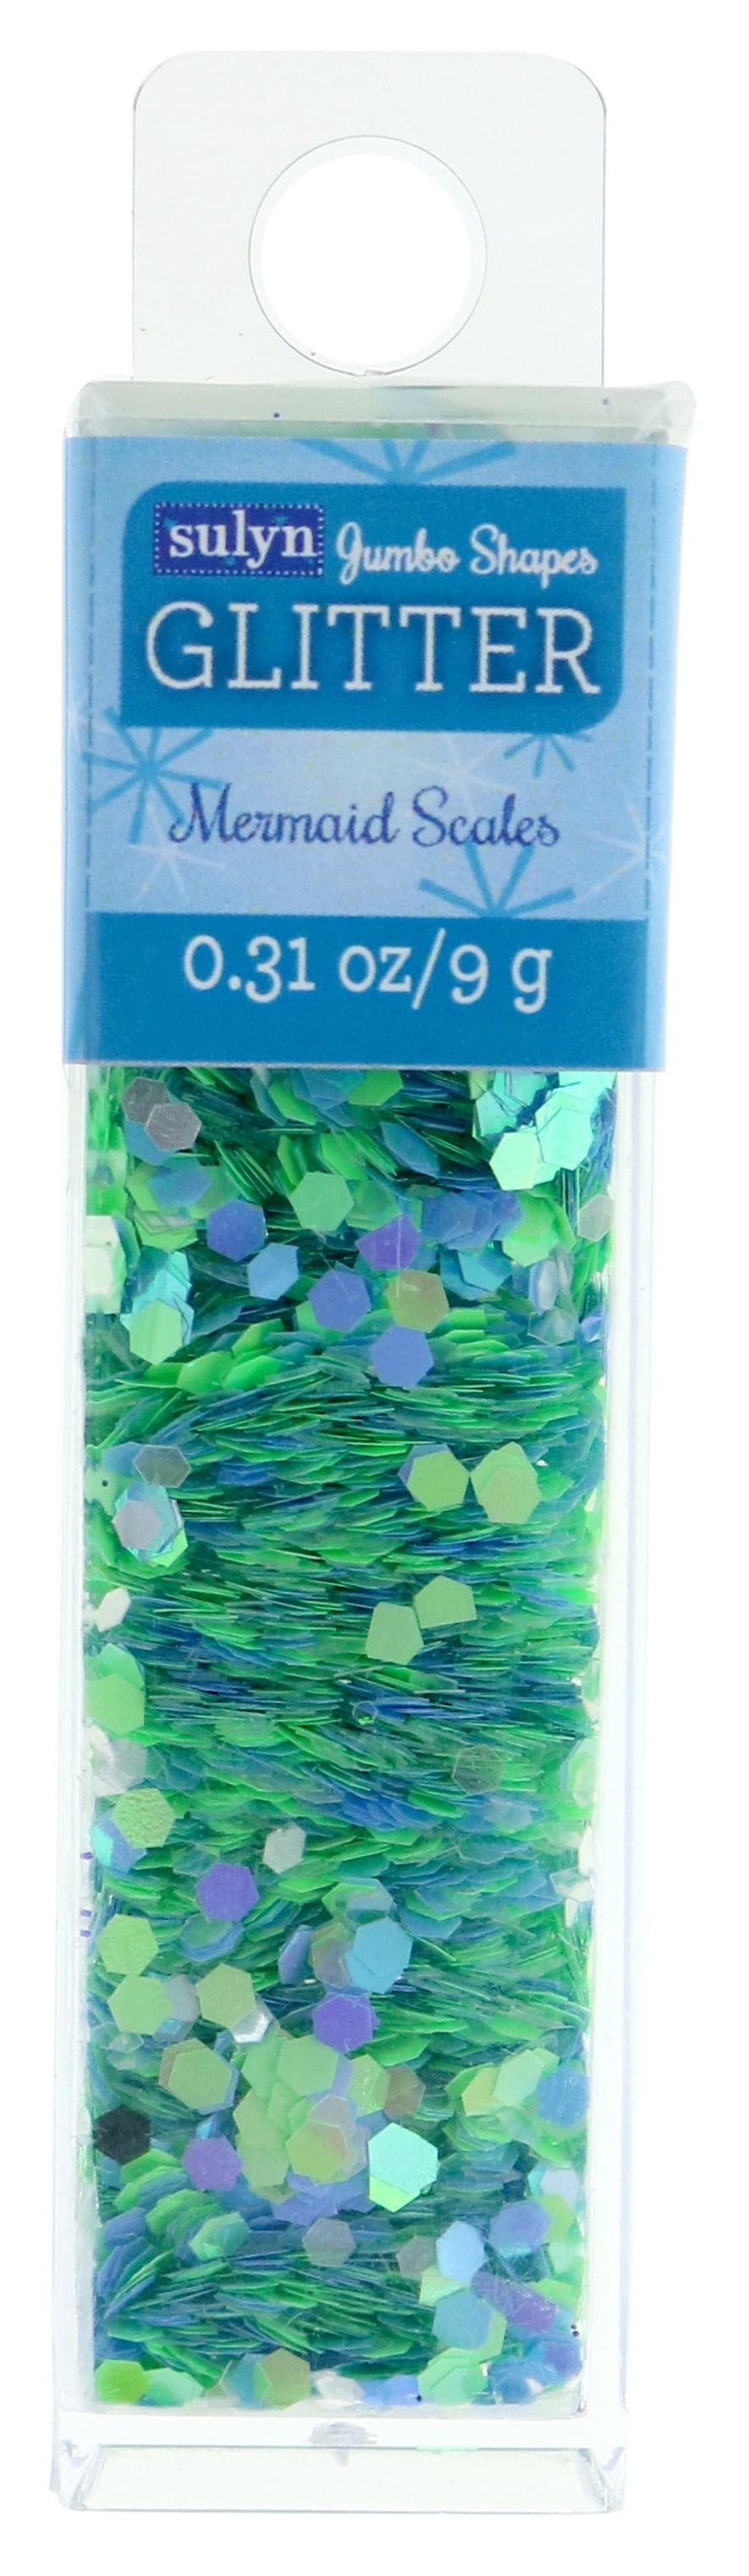 Sulyn Jumbo Glitter for Crafts, Green and Blue Mermaid Scales, .31 oz